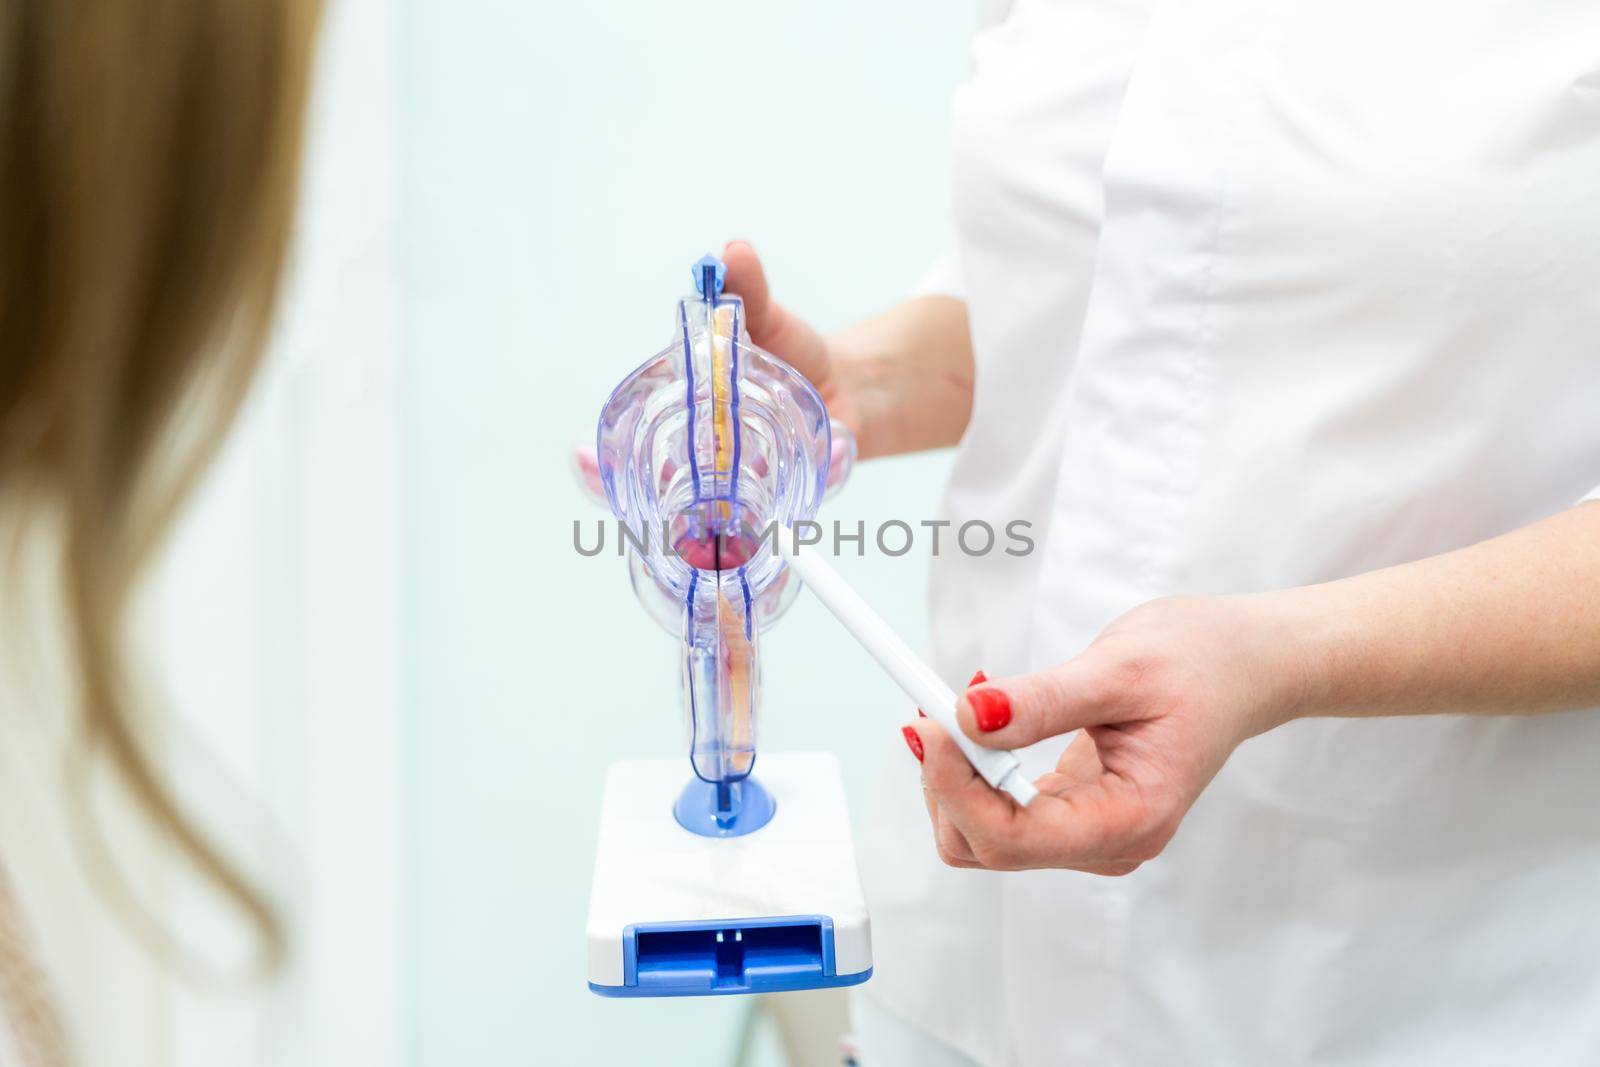 Gynecologist doctor consulting young woman using uterus anatomy model by Mariakray